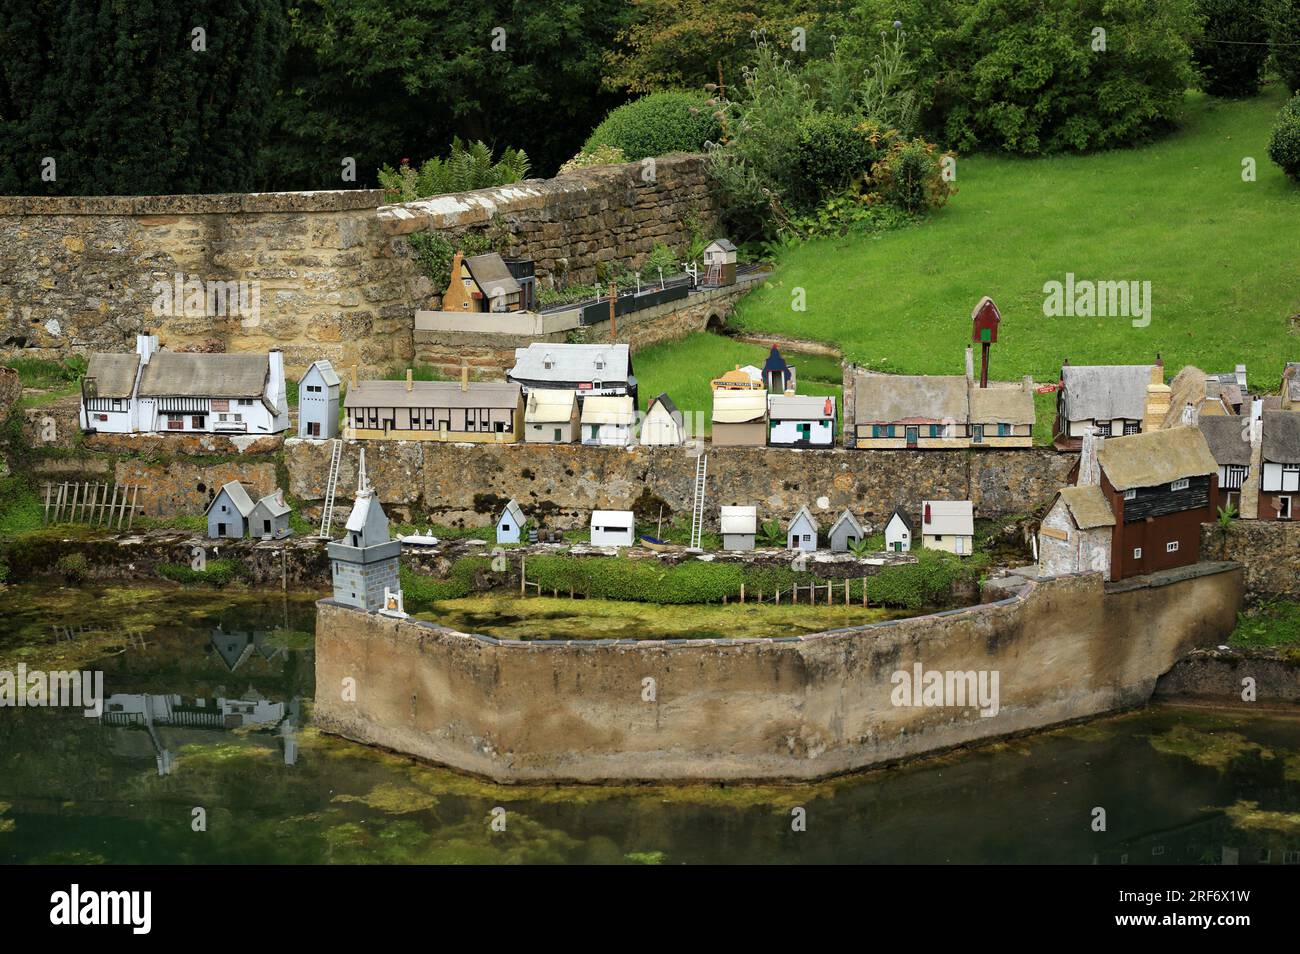 Wolf's cove model village in the grounds of Snowshill manor, near Broadway, Gloucestershire, England, UK. Stock Photo